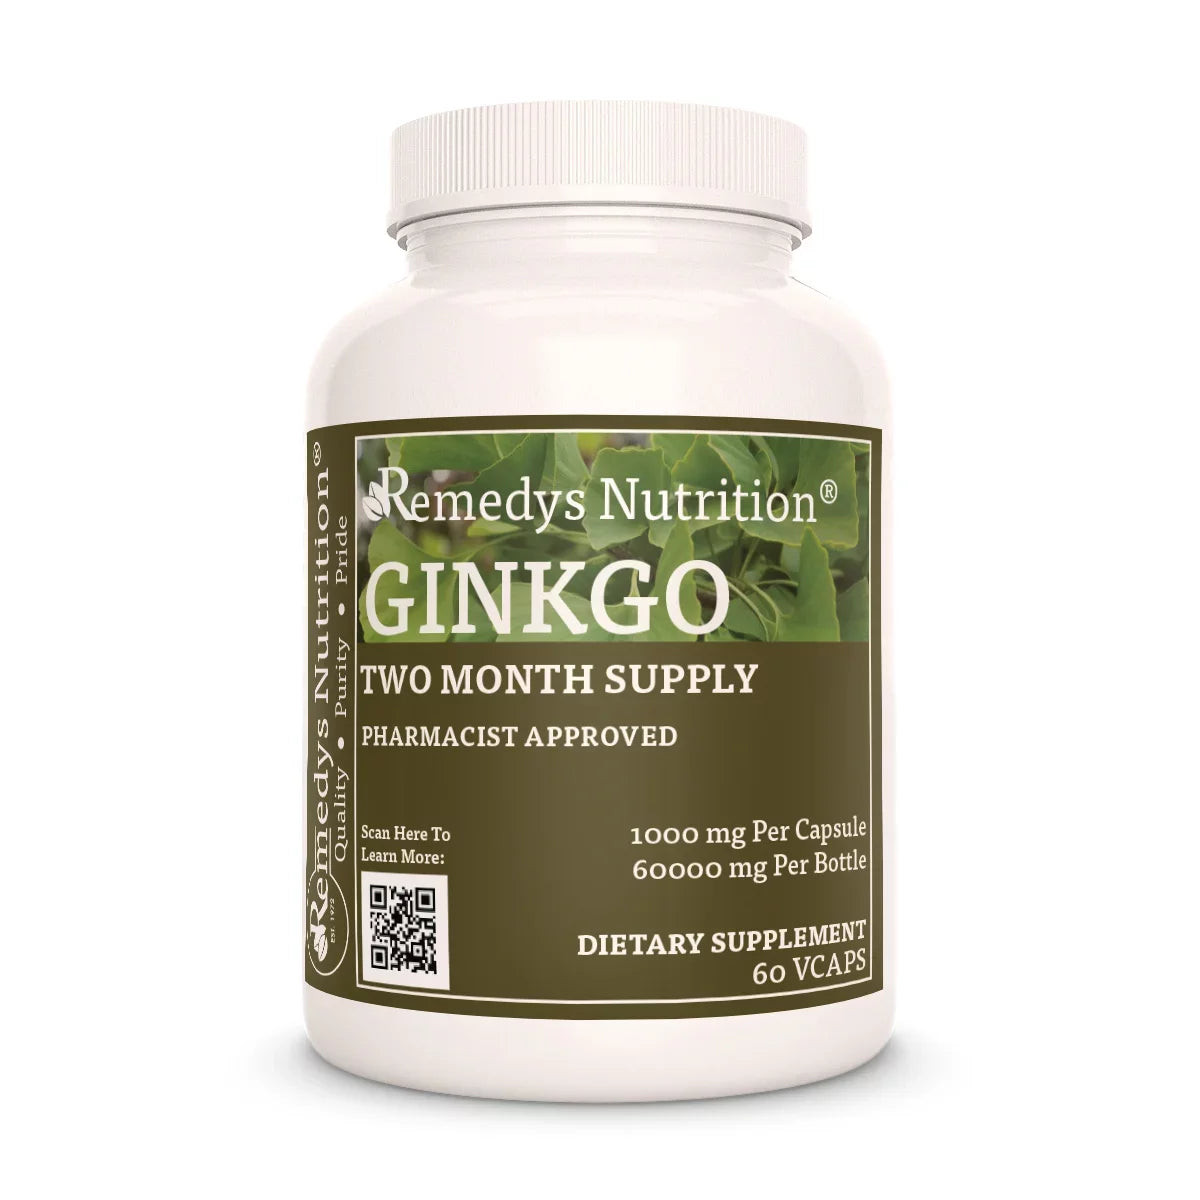 Image of Remedy's Nutrition® Ginkgo Biloba Capsules Dietary Herbal Supplement front bottle. Made in the USA.